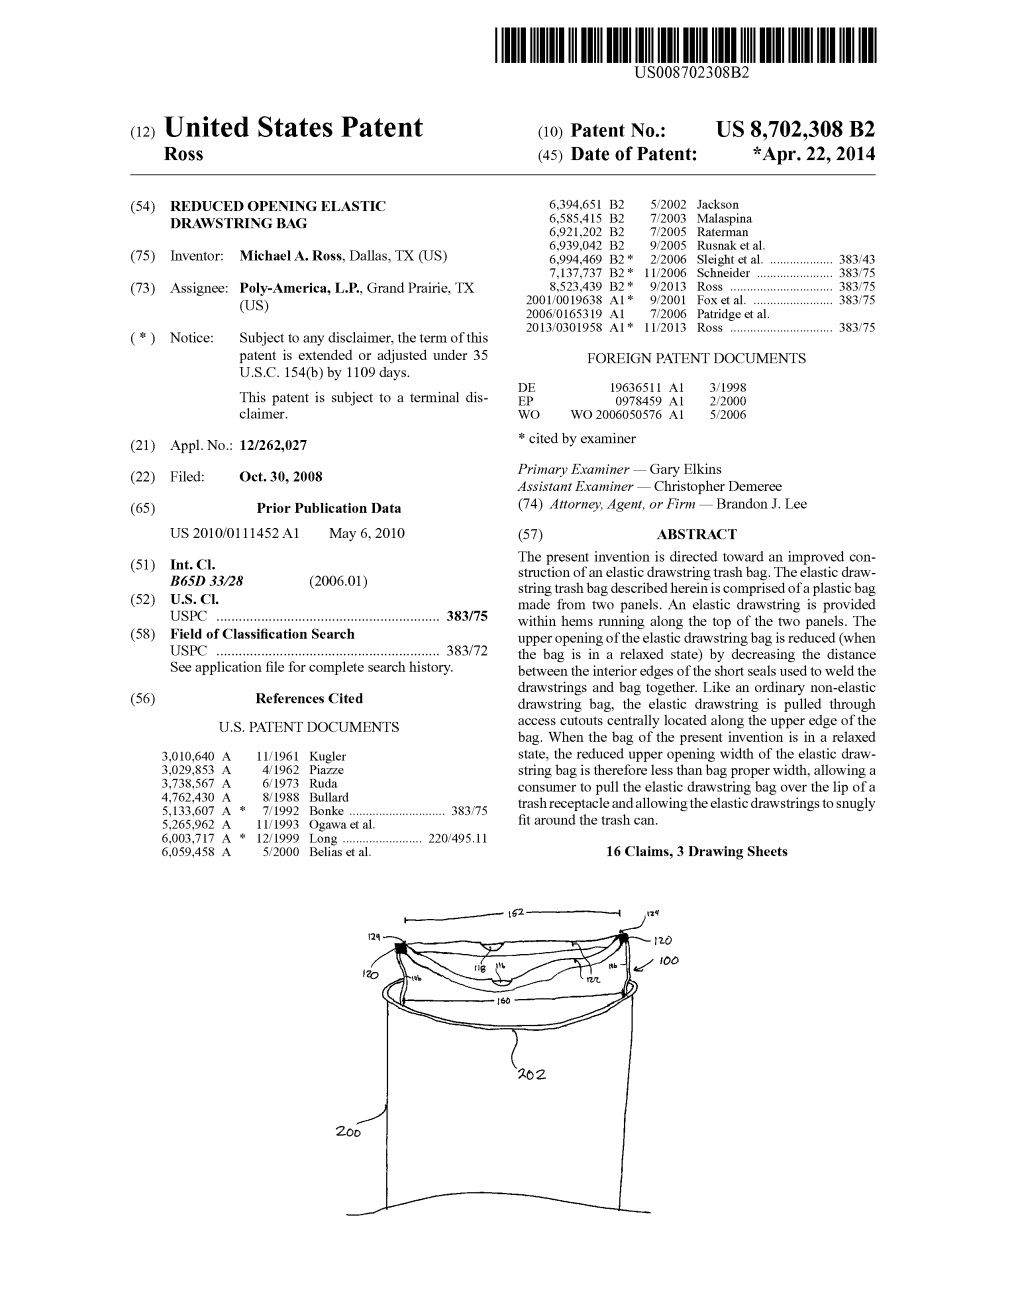 (12) United States Patent (10) Patent No.: US 8,702,308 B2 ROSS (45) Date of Patent: *Apr